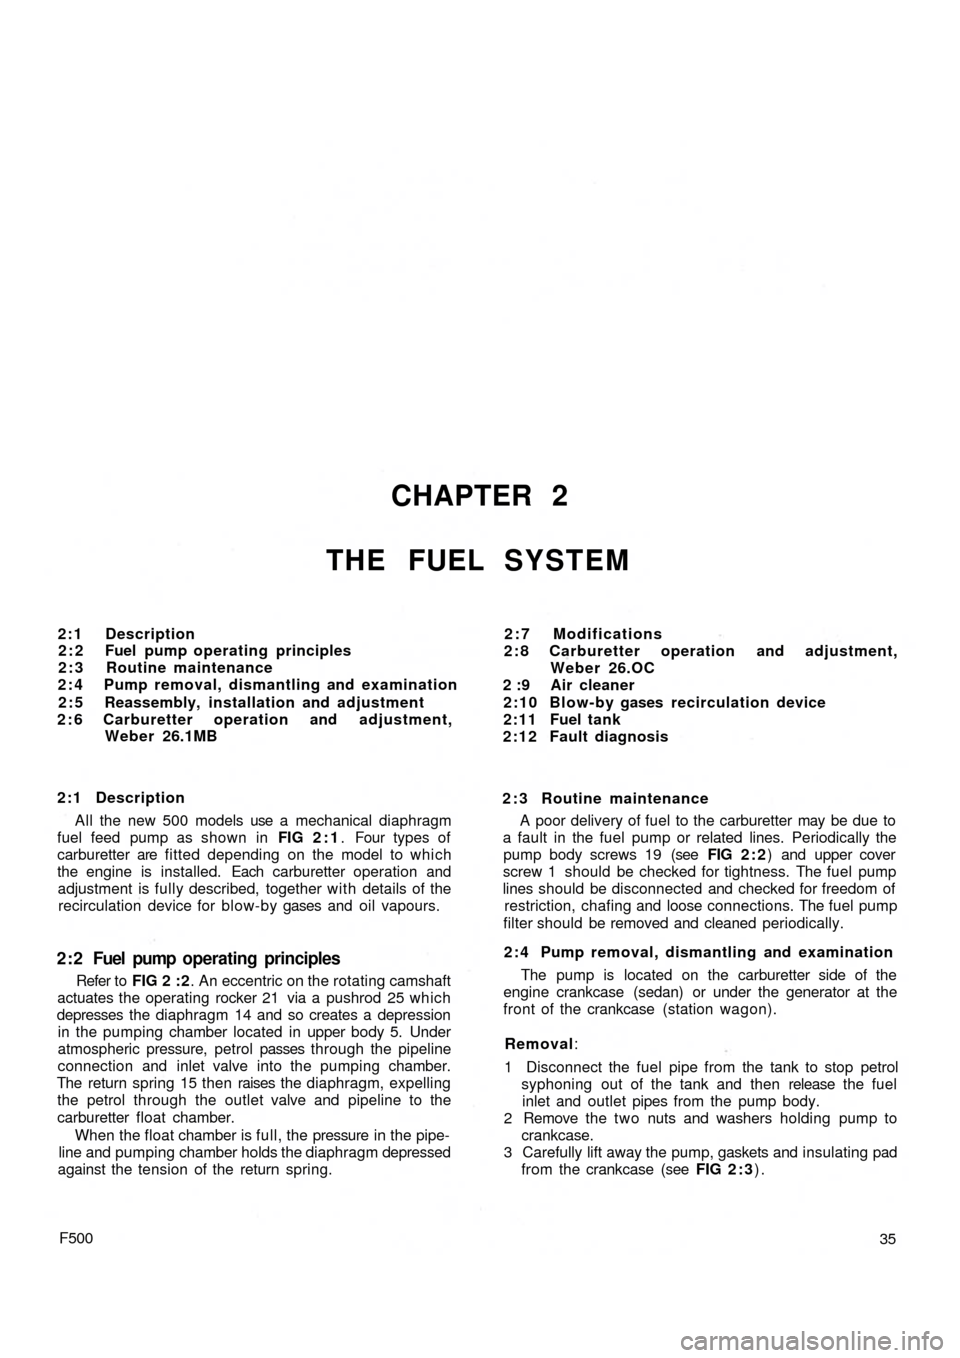 FIAT 500 1960 1.G Workshop Manual CHAPTER 2
THE FUEL SYSTEM
2:1 Description
2 : 2 Fuel pump operating principles
2 : 3 Routine maintenance
2 : 4 Pump removal, dismantling and examination
2 : 5 Reassembly, installation and adjustment
2